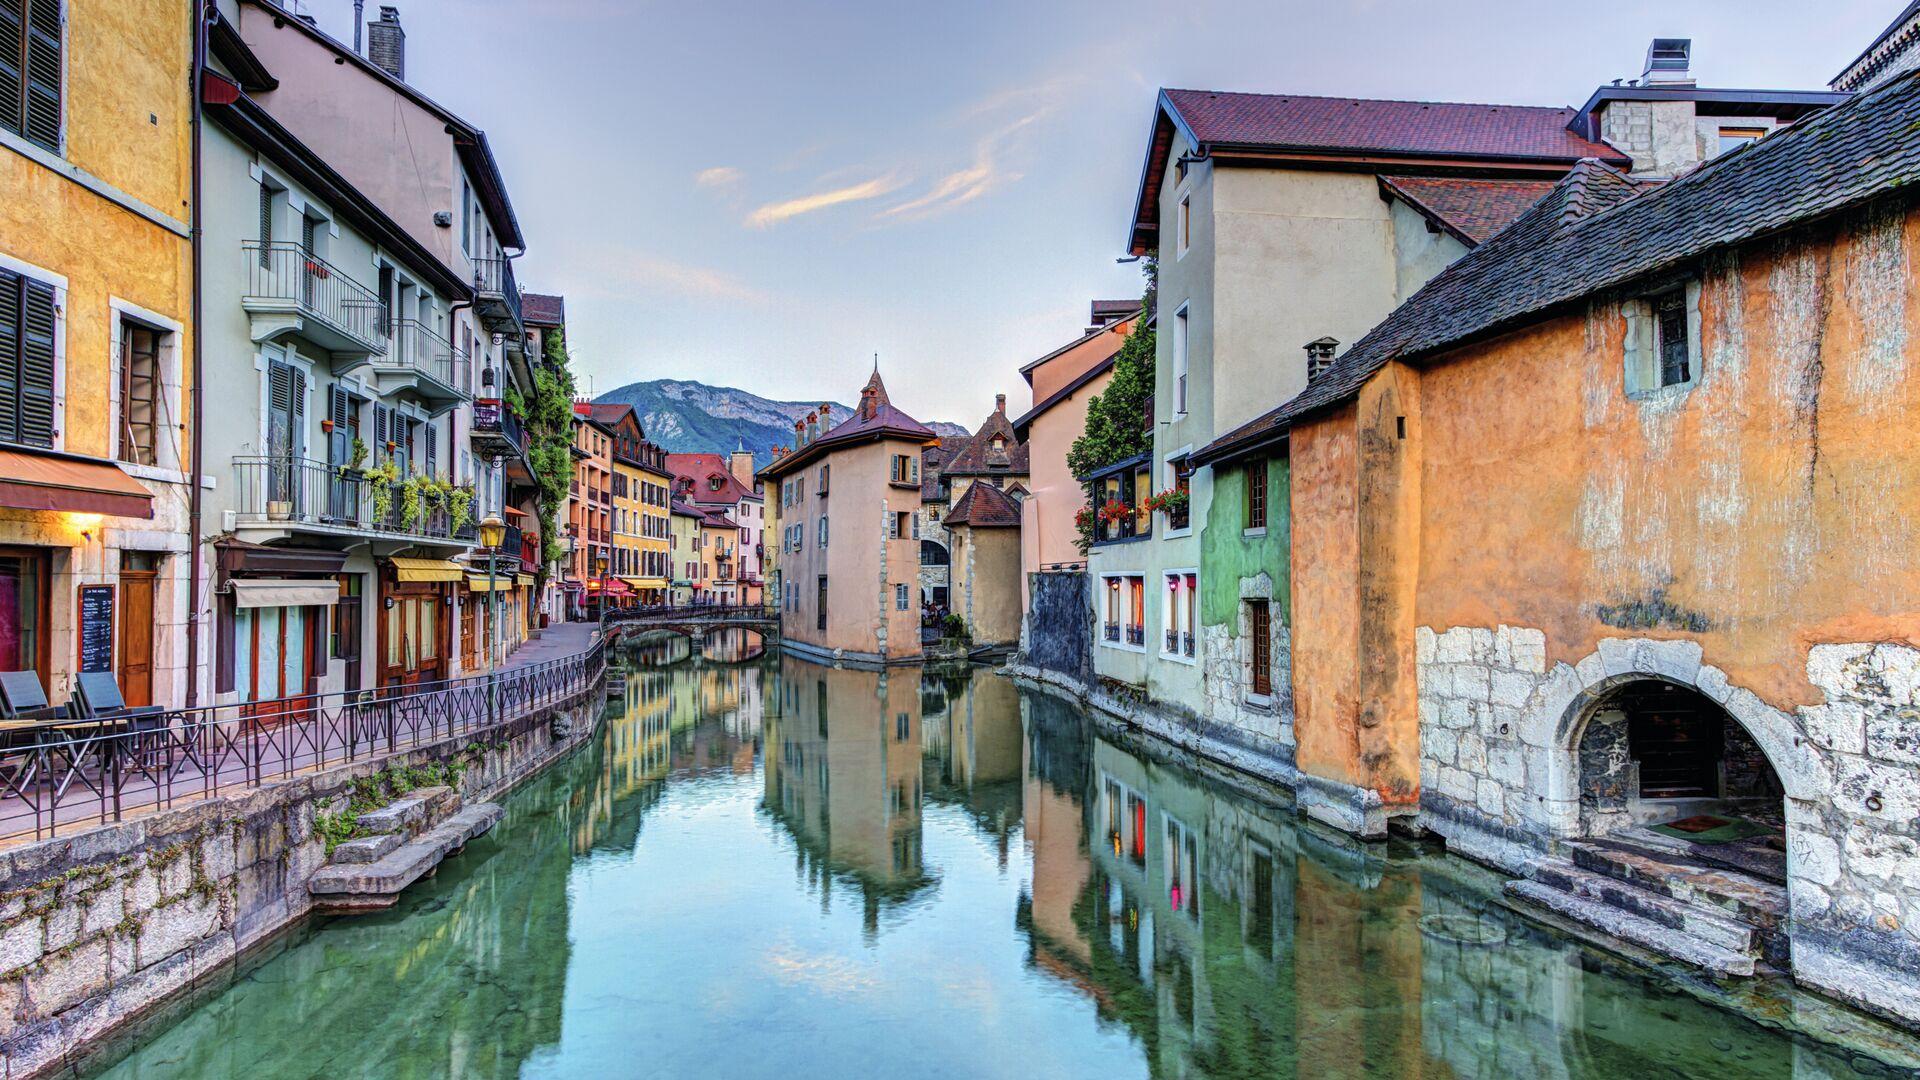 Quai de l'Ile and canal in Annecy old city with colorful houses, France, HDR